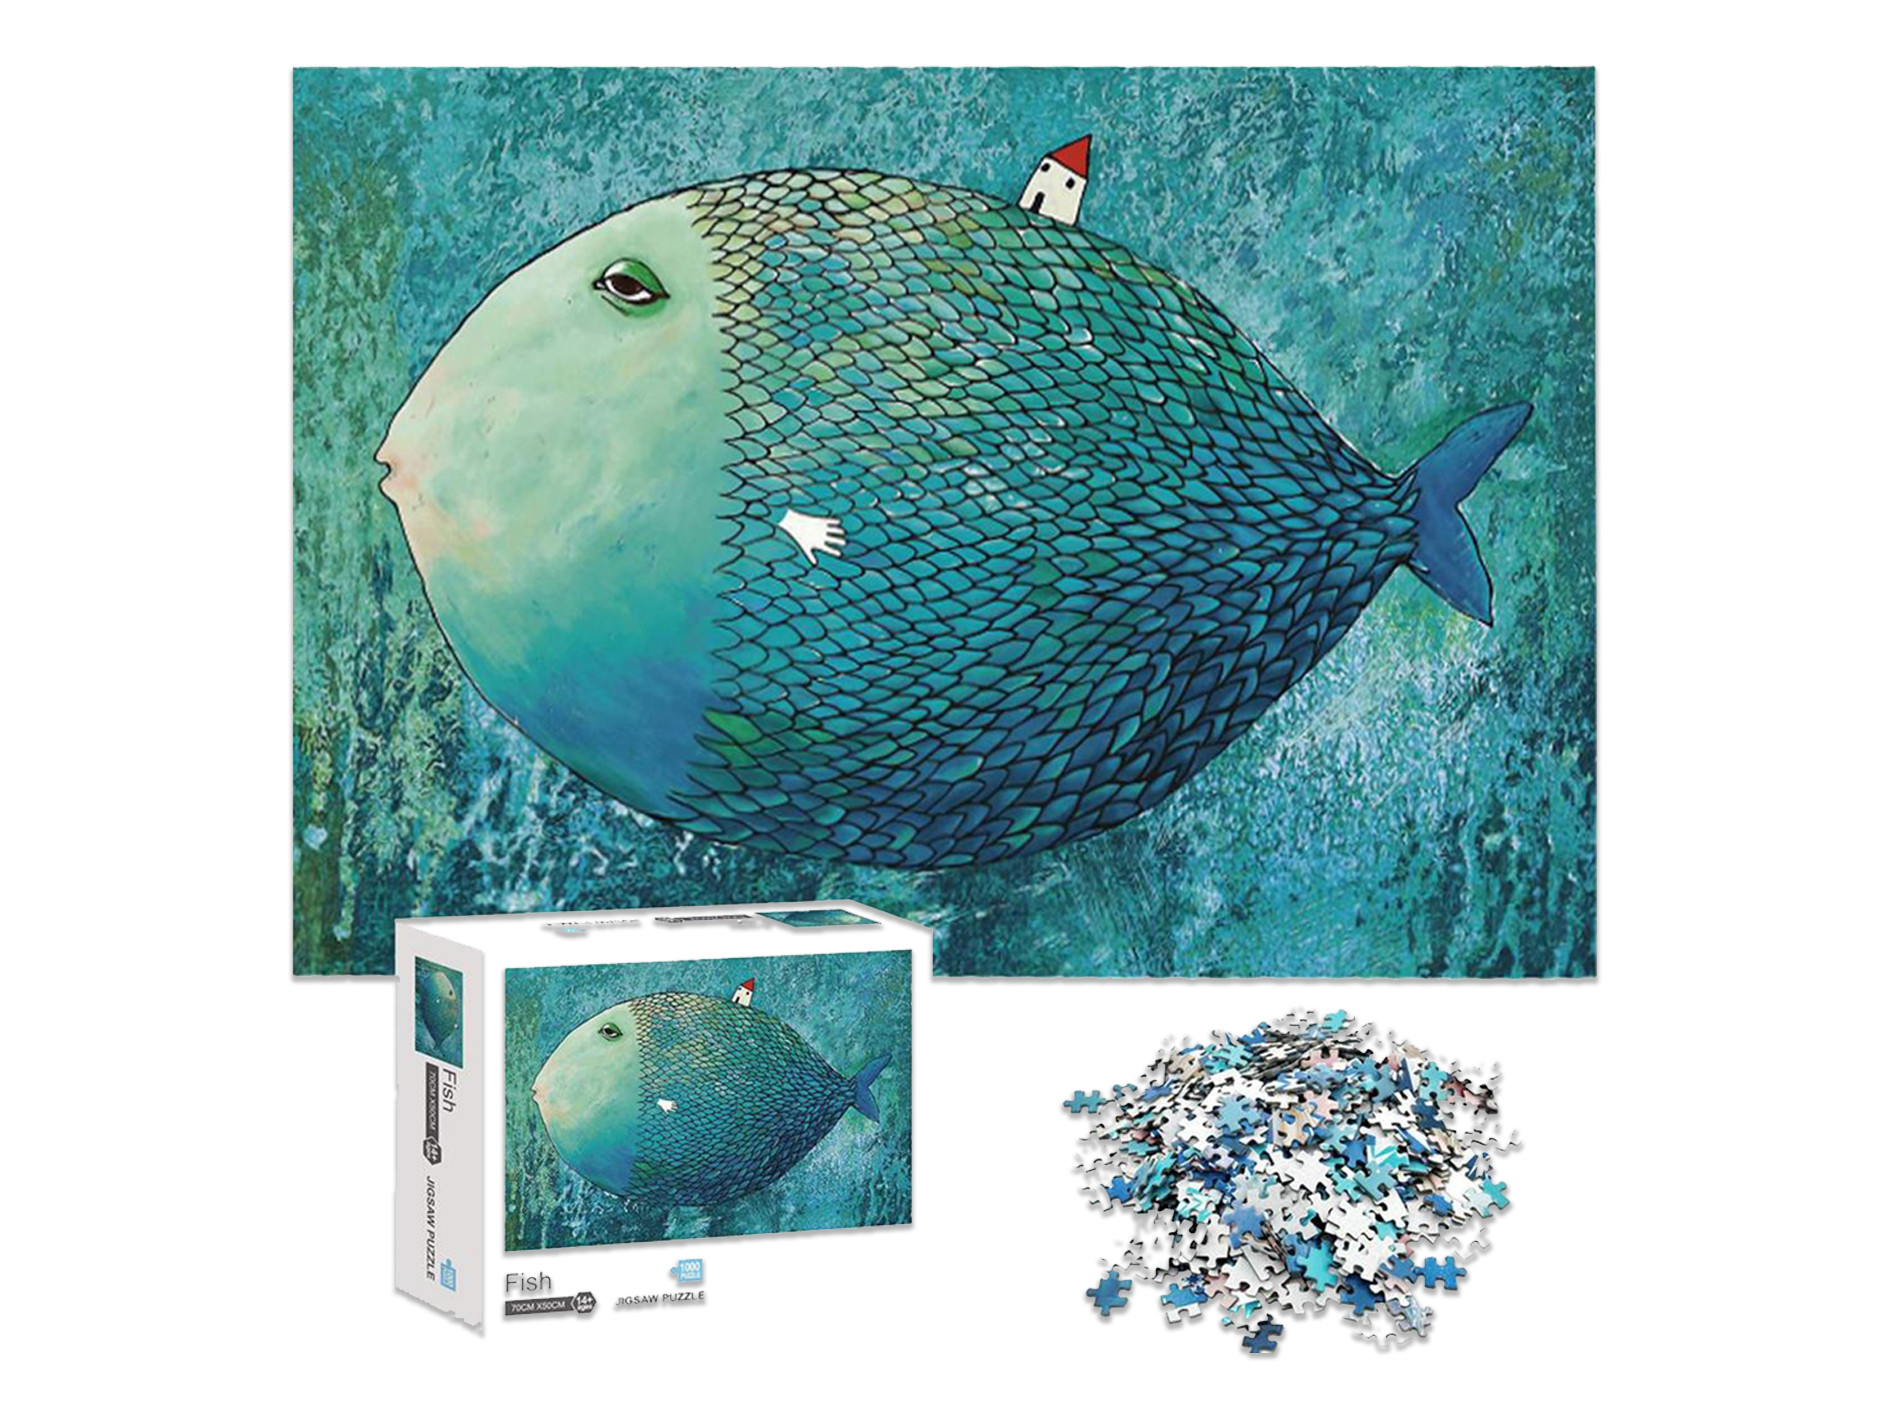 Fish and house puzzle - 1000pc (Size 41.9xcm*29.7cm)